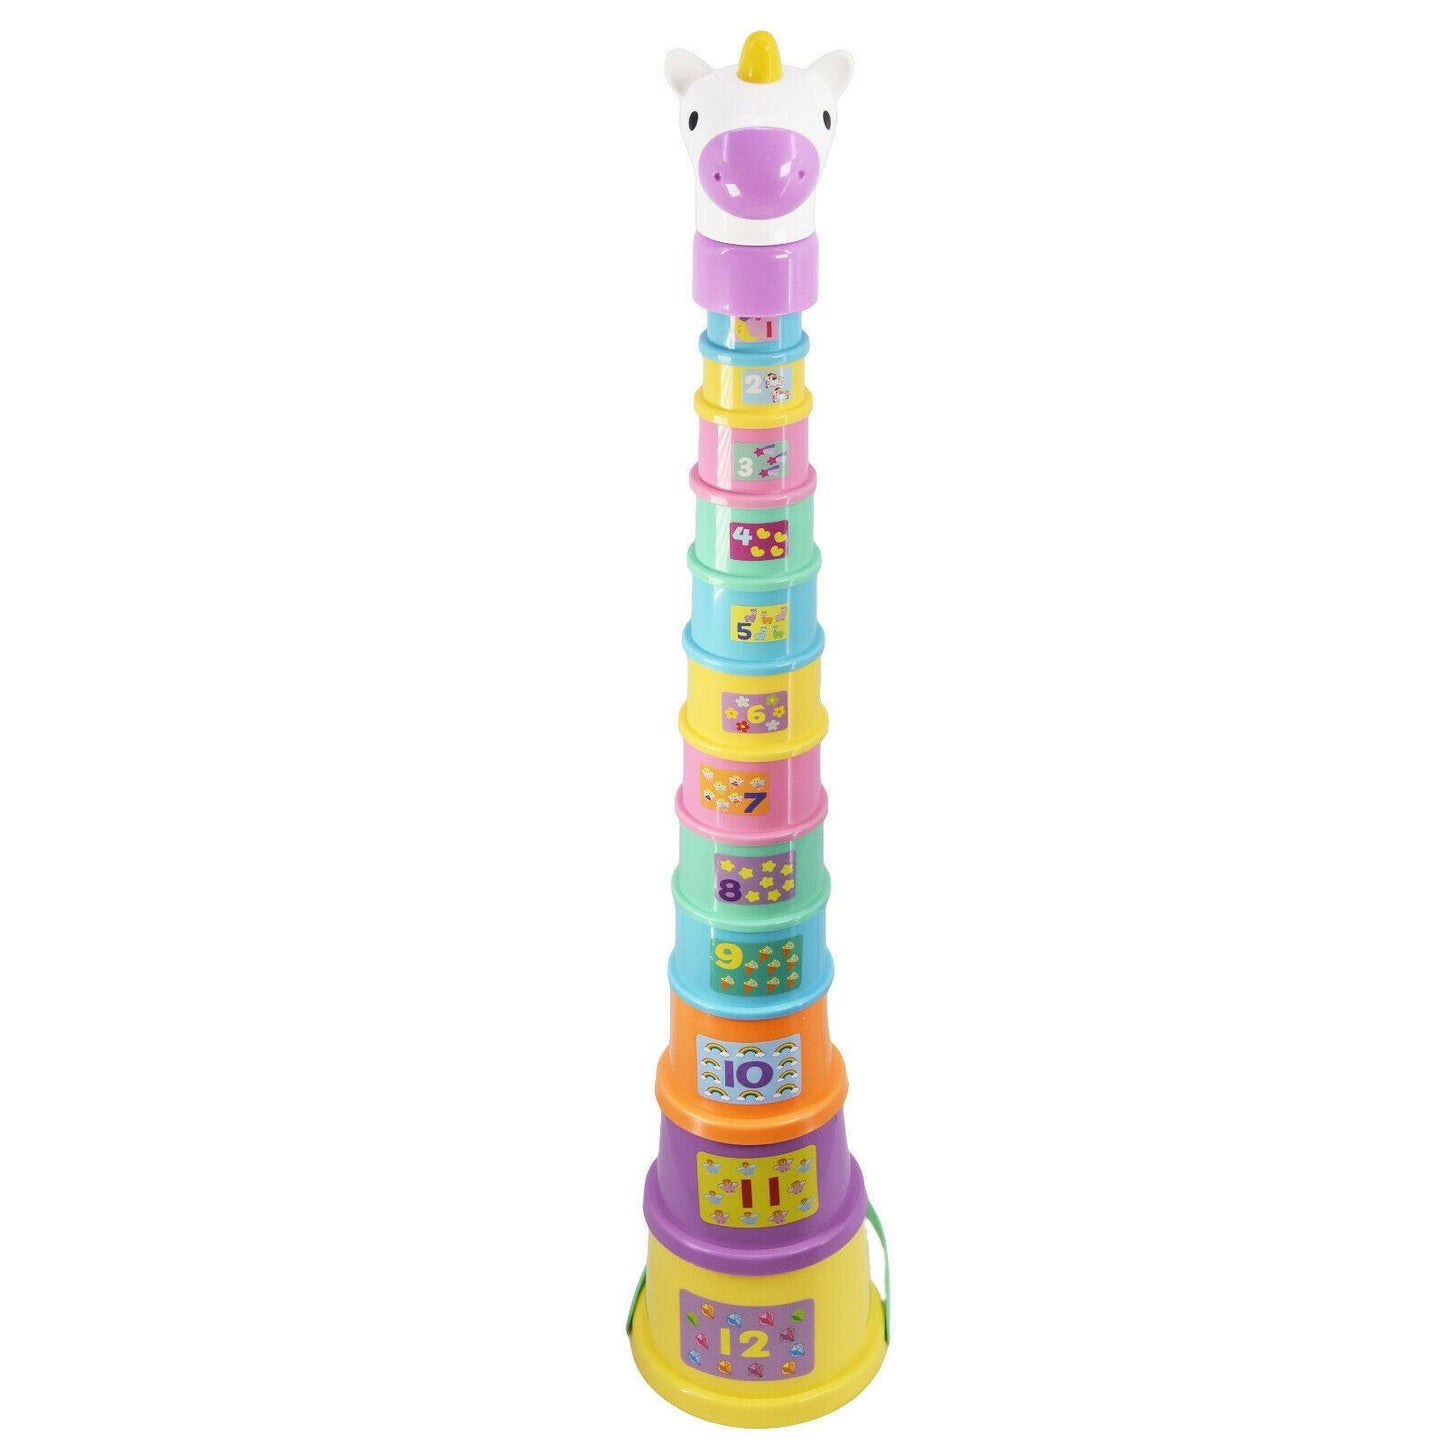 Unicorn Stacking Nesting Cup Block by The Magic Toy Shop - UKBuyZone